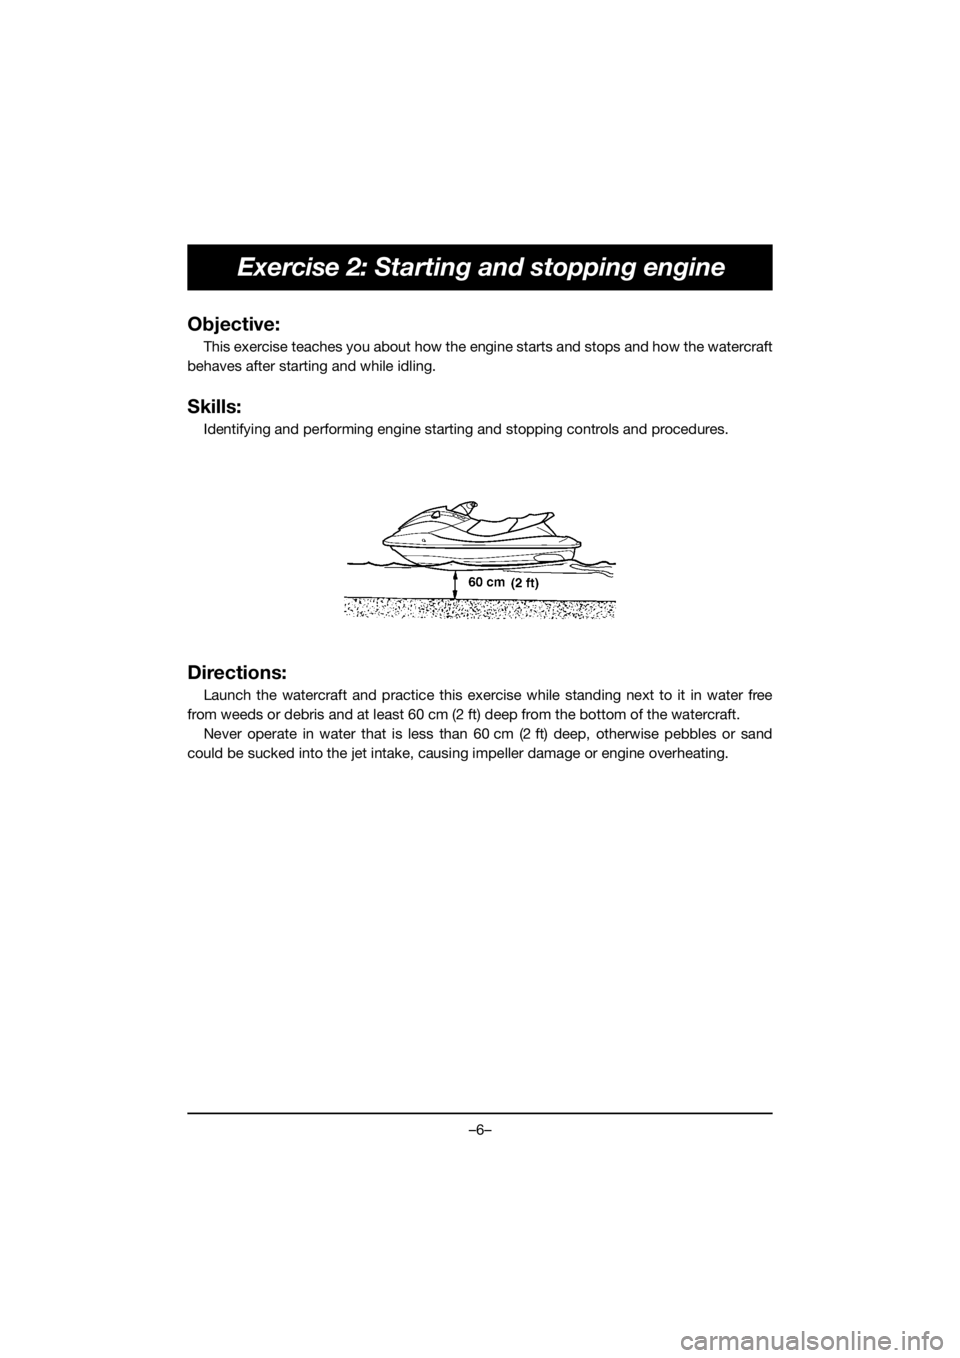 YAMAHA FX HO 2019  ΟΔΗΓΌΣ ΧΡΉΣΗΣ (in Greek) –6–
Exercise 2: Starting and stopping engine
Objective:
This exercise teaches you about how the engine starts and stops and how the watercraft
behaves after starting and while idling.
Skills:
Iden